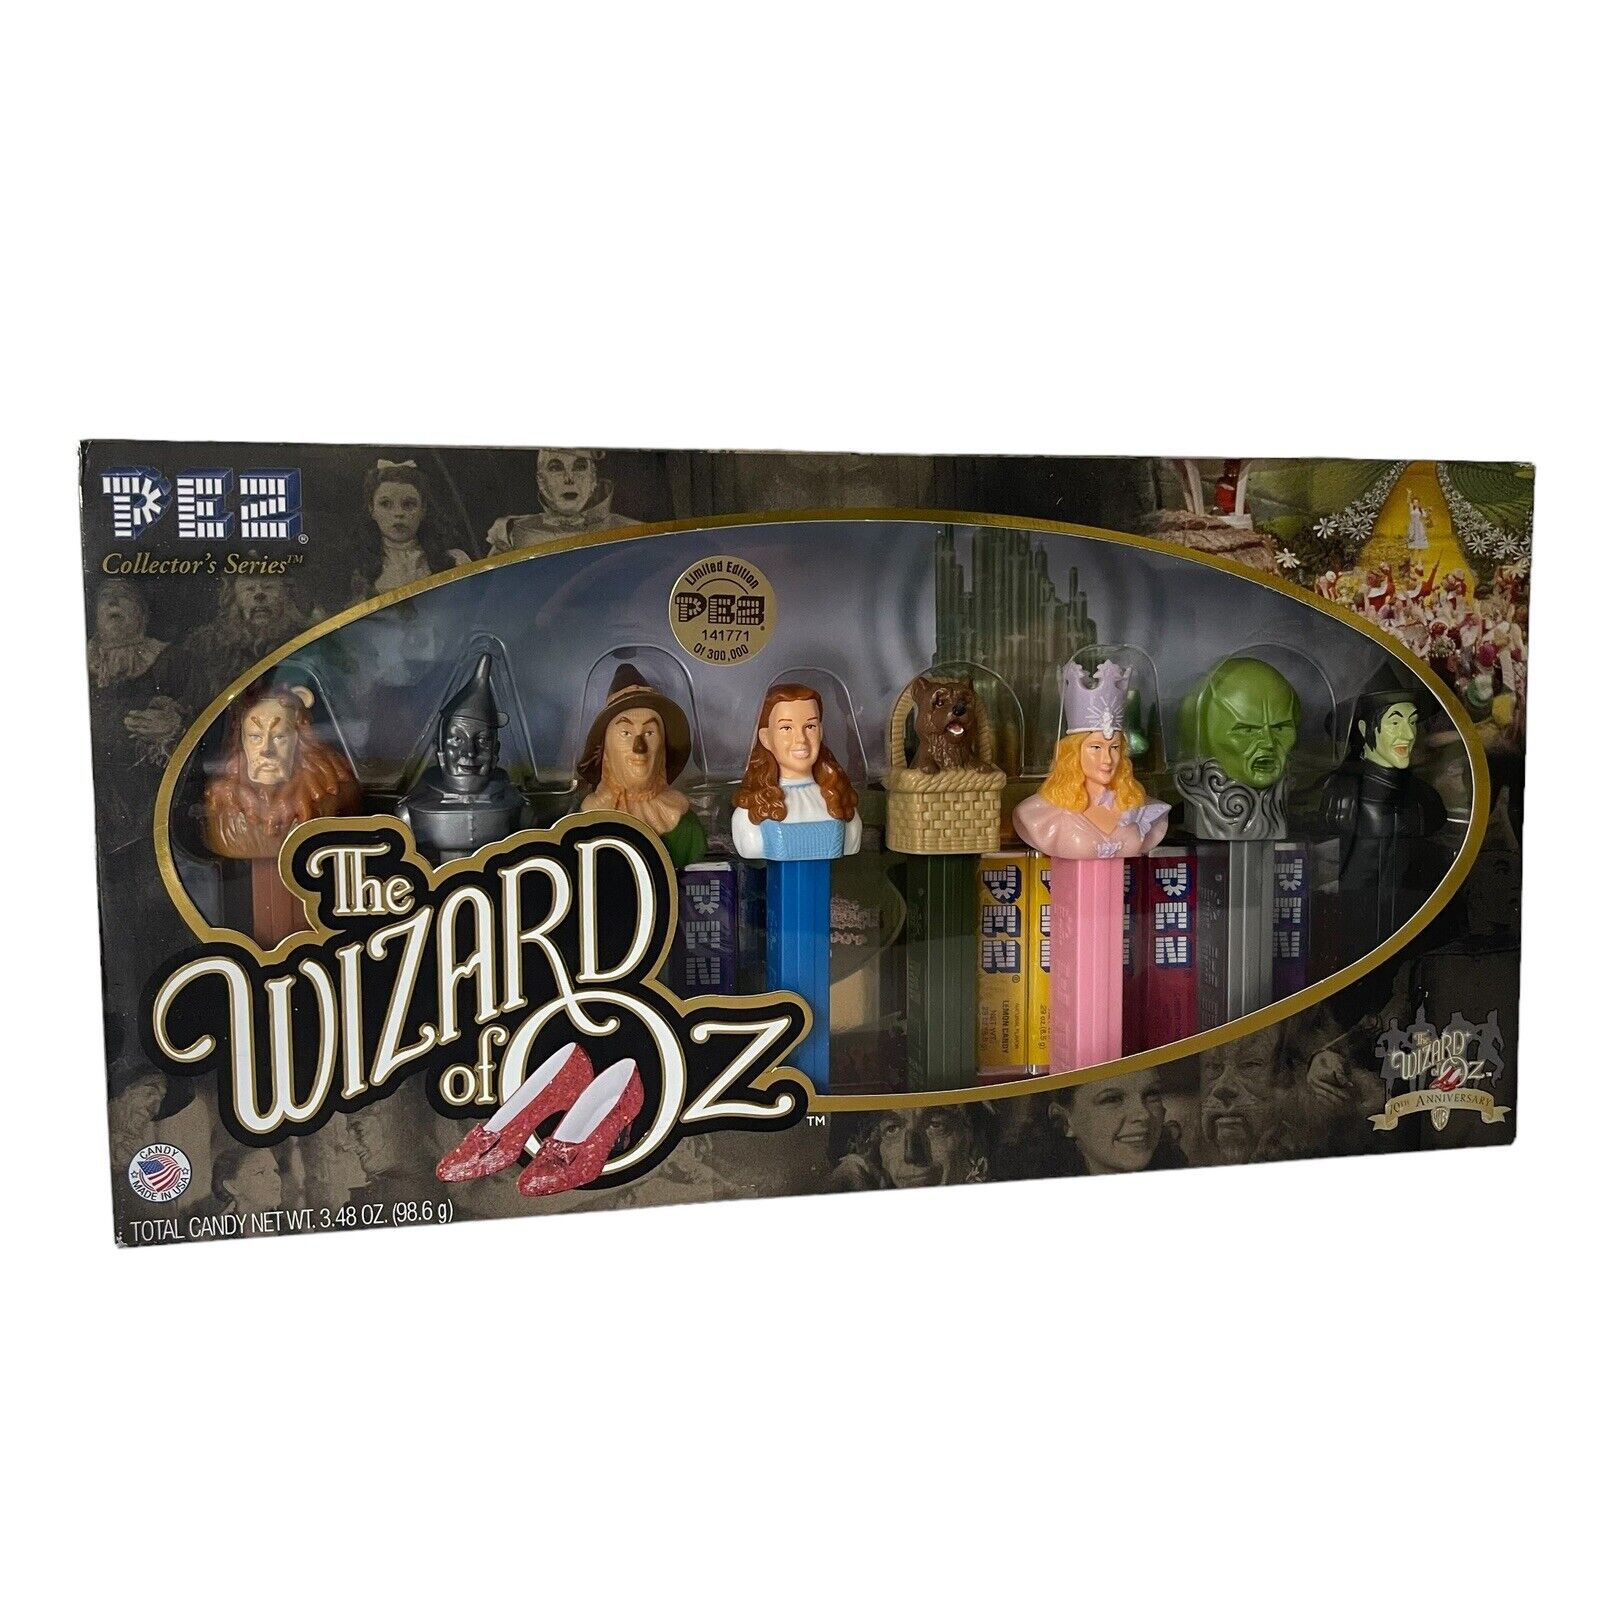 New Pez The Wizard of Oz 70th Anniversary Limited Edition Collector Series Candy